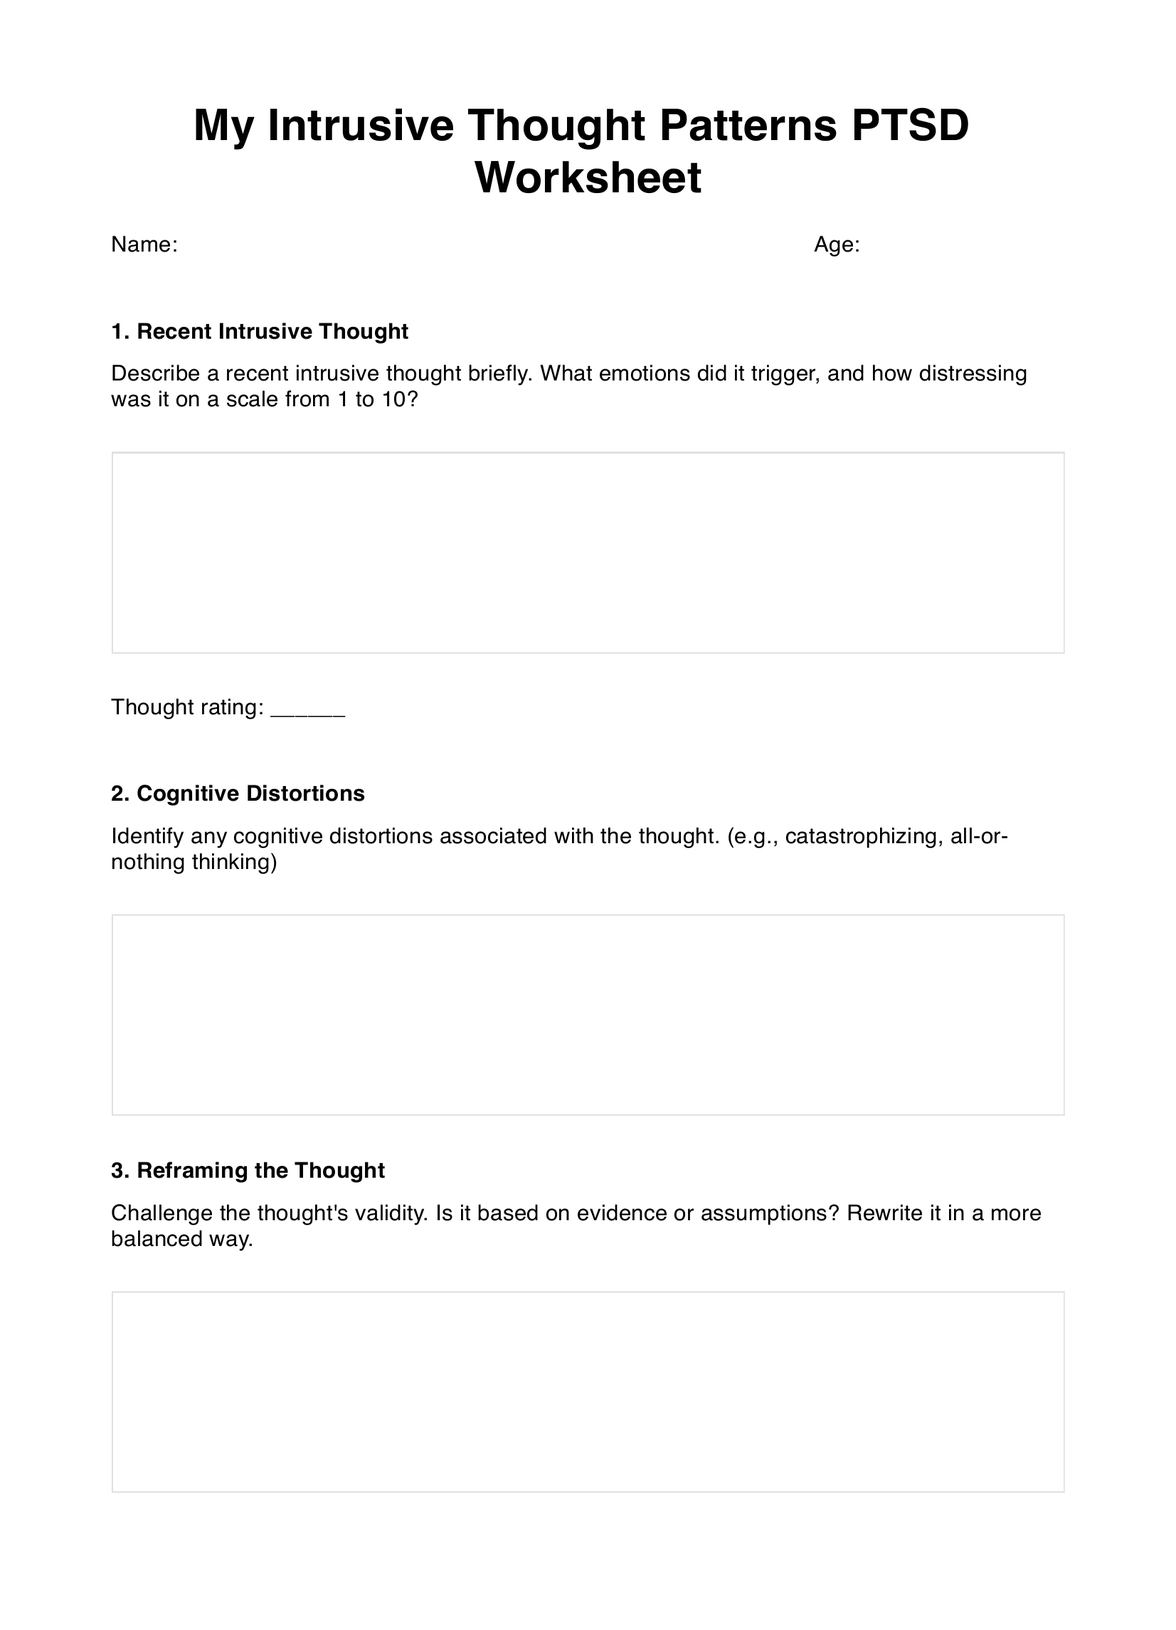 My Intrusive Thought Patterns PTSD Worksheet PDF Example